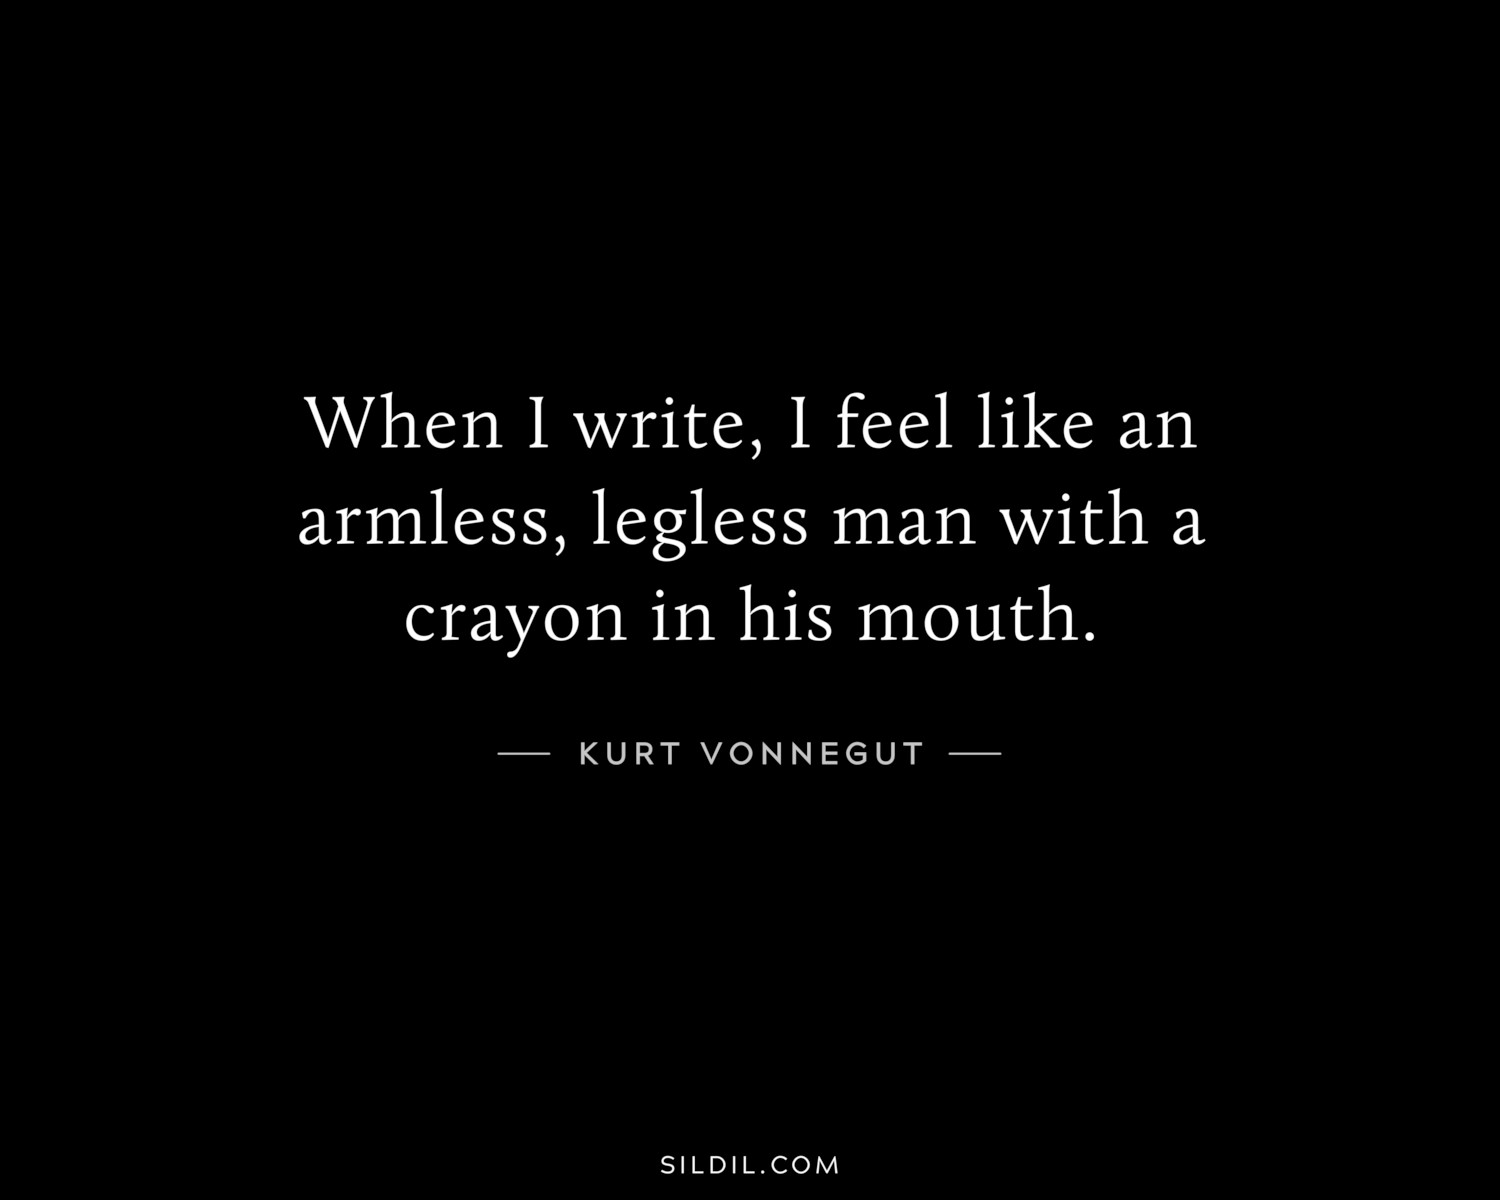 When I write, I feel like an armless, legless man with a crayon in his mouth.